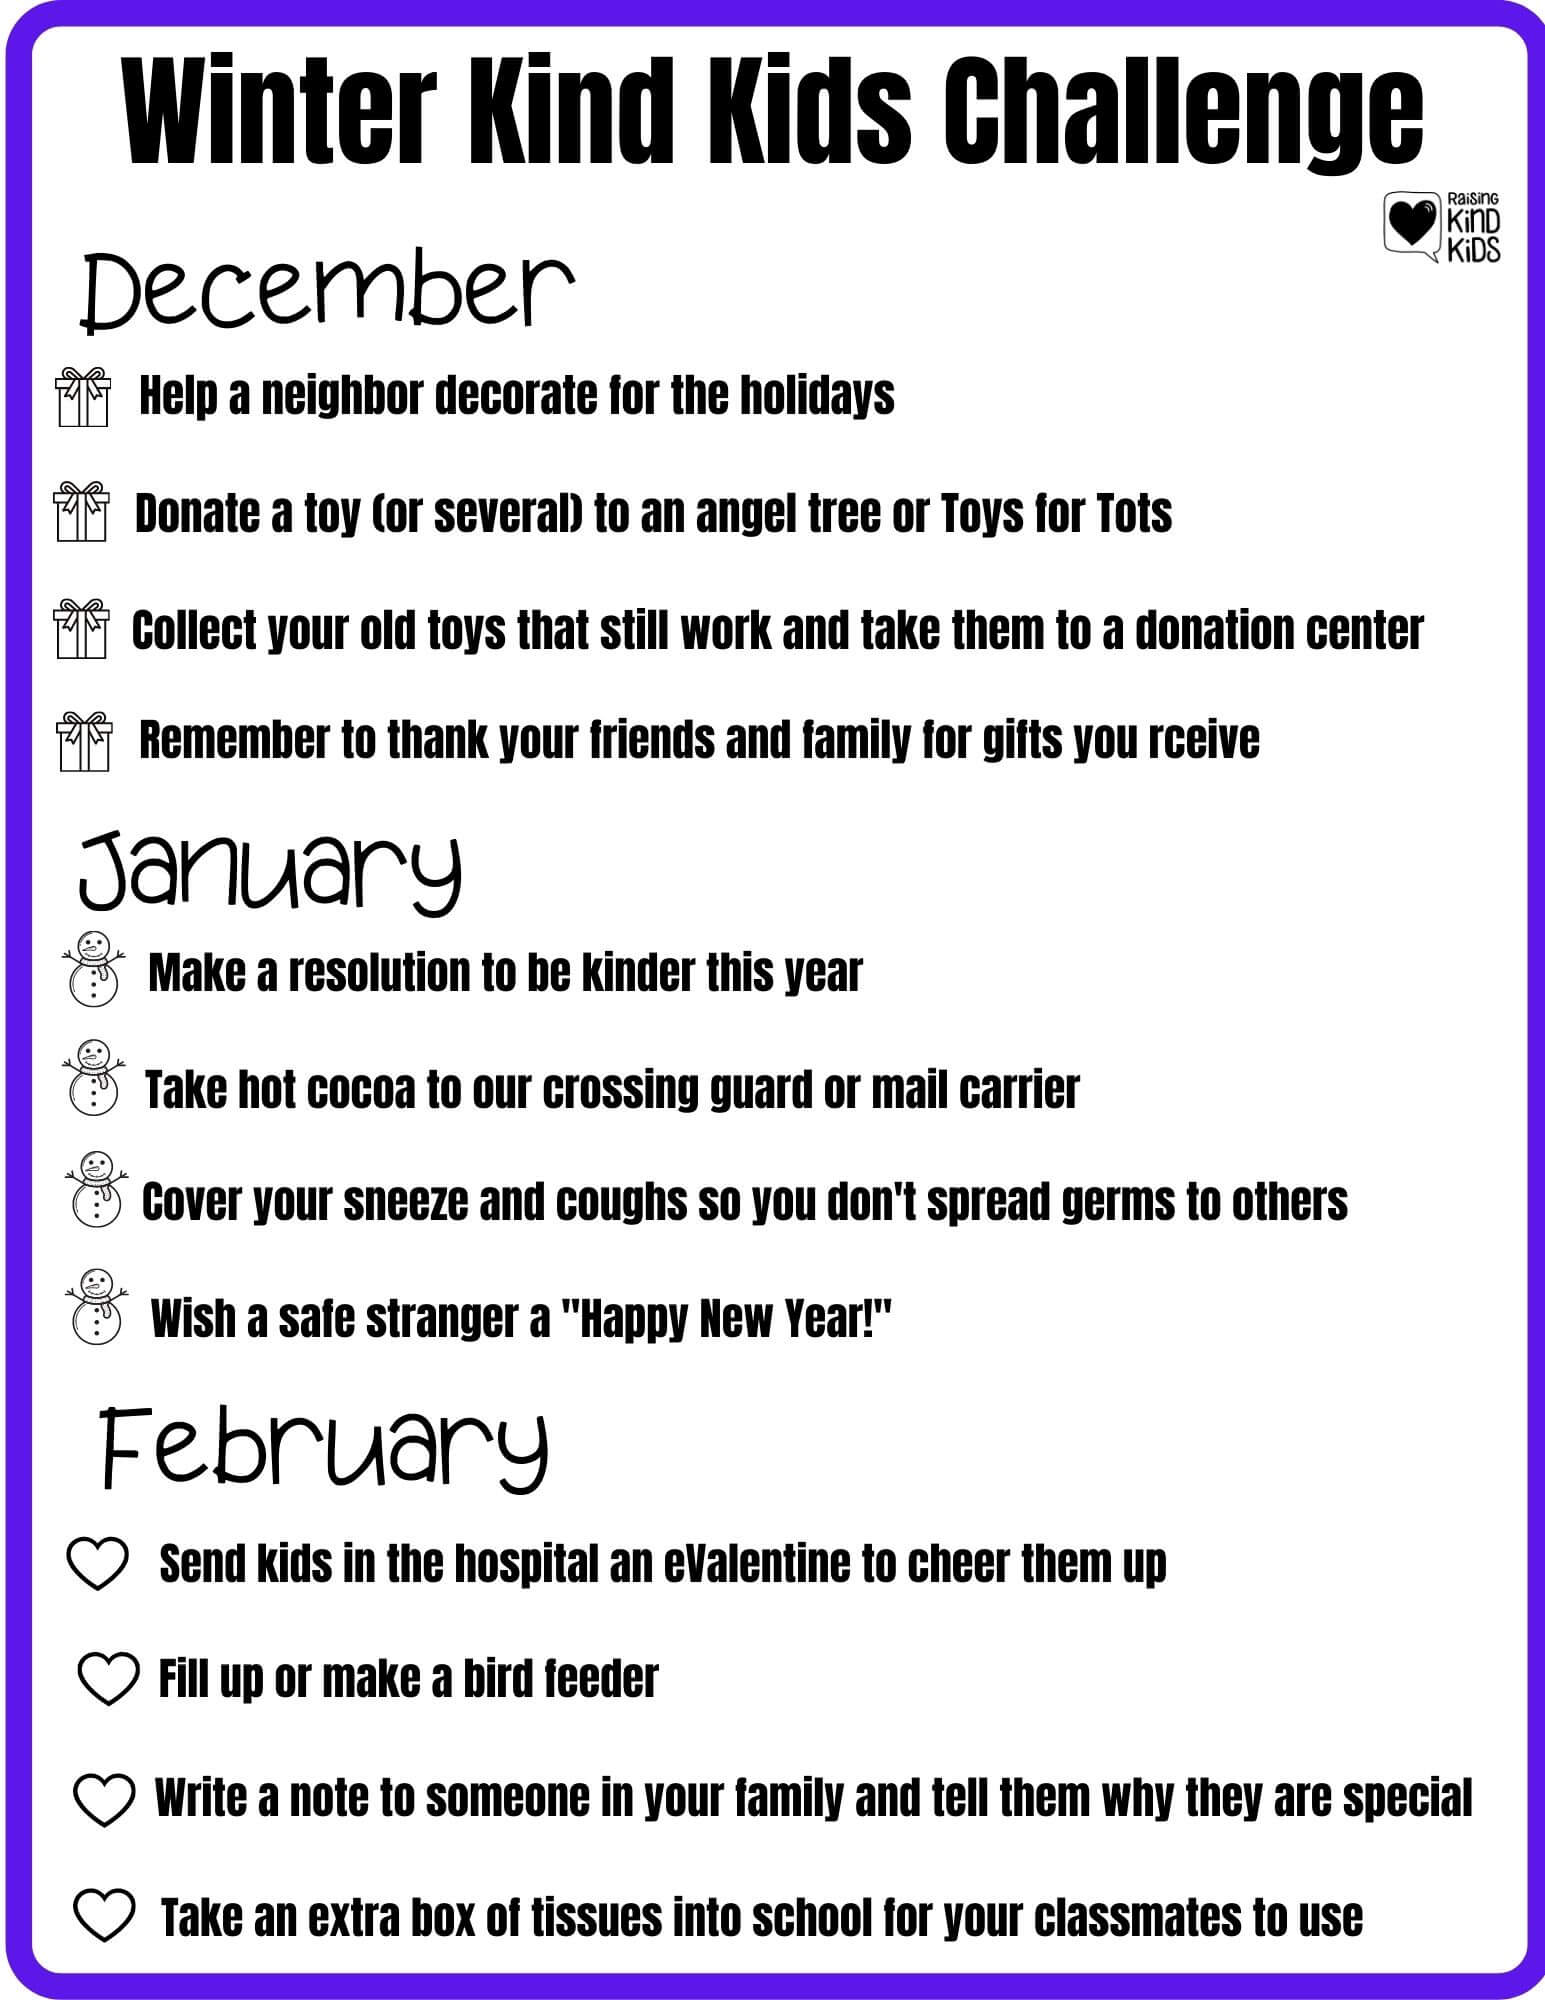 This winter kind kids challenge will help kids be kinder to those around them. This is perfect for December kindness activities for kids. #kindnessactivities #kindnessactivitiesforkids #kindkids #kindnessmatters #kindnesschallenge #kindnesschallengeforkids #winteractivitiesforkids